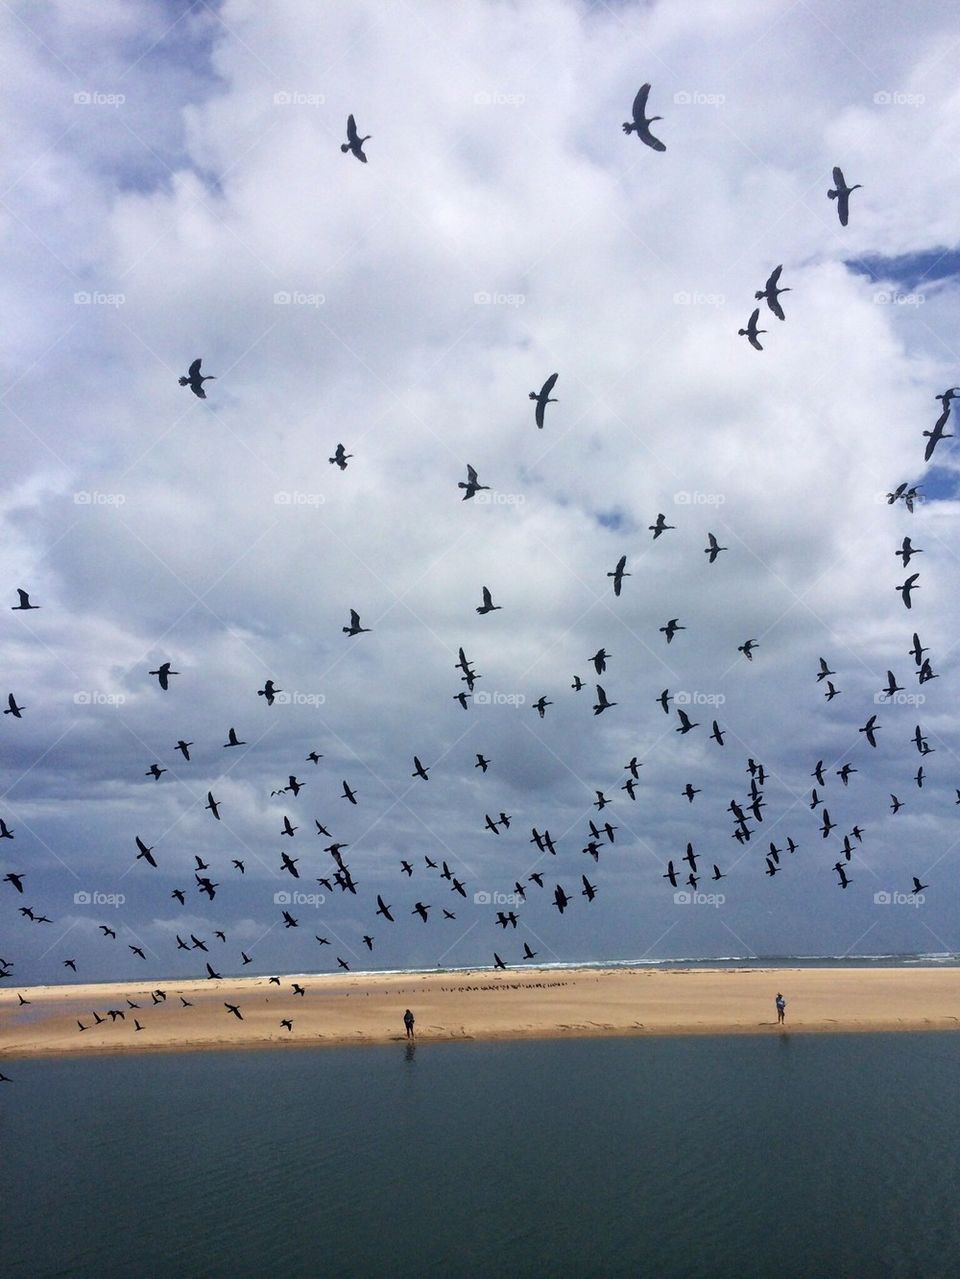 Birds flying over beach and storm approaching 